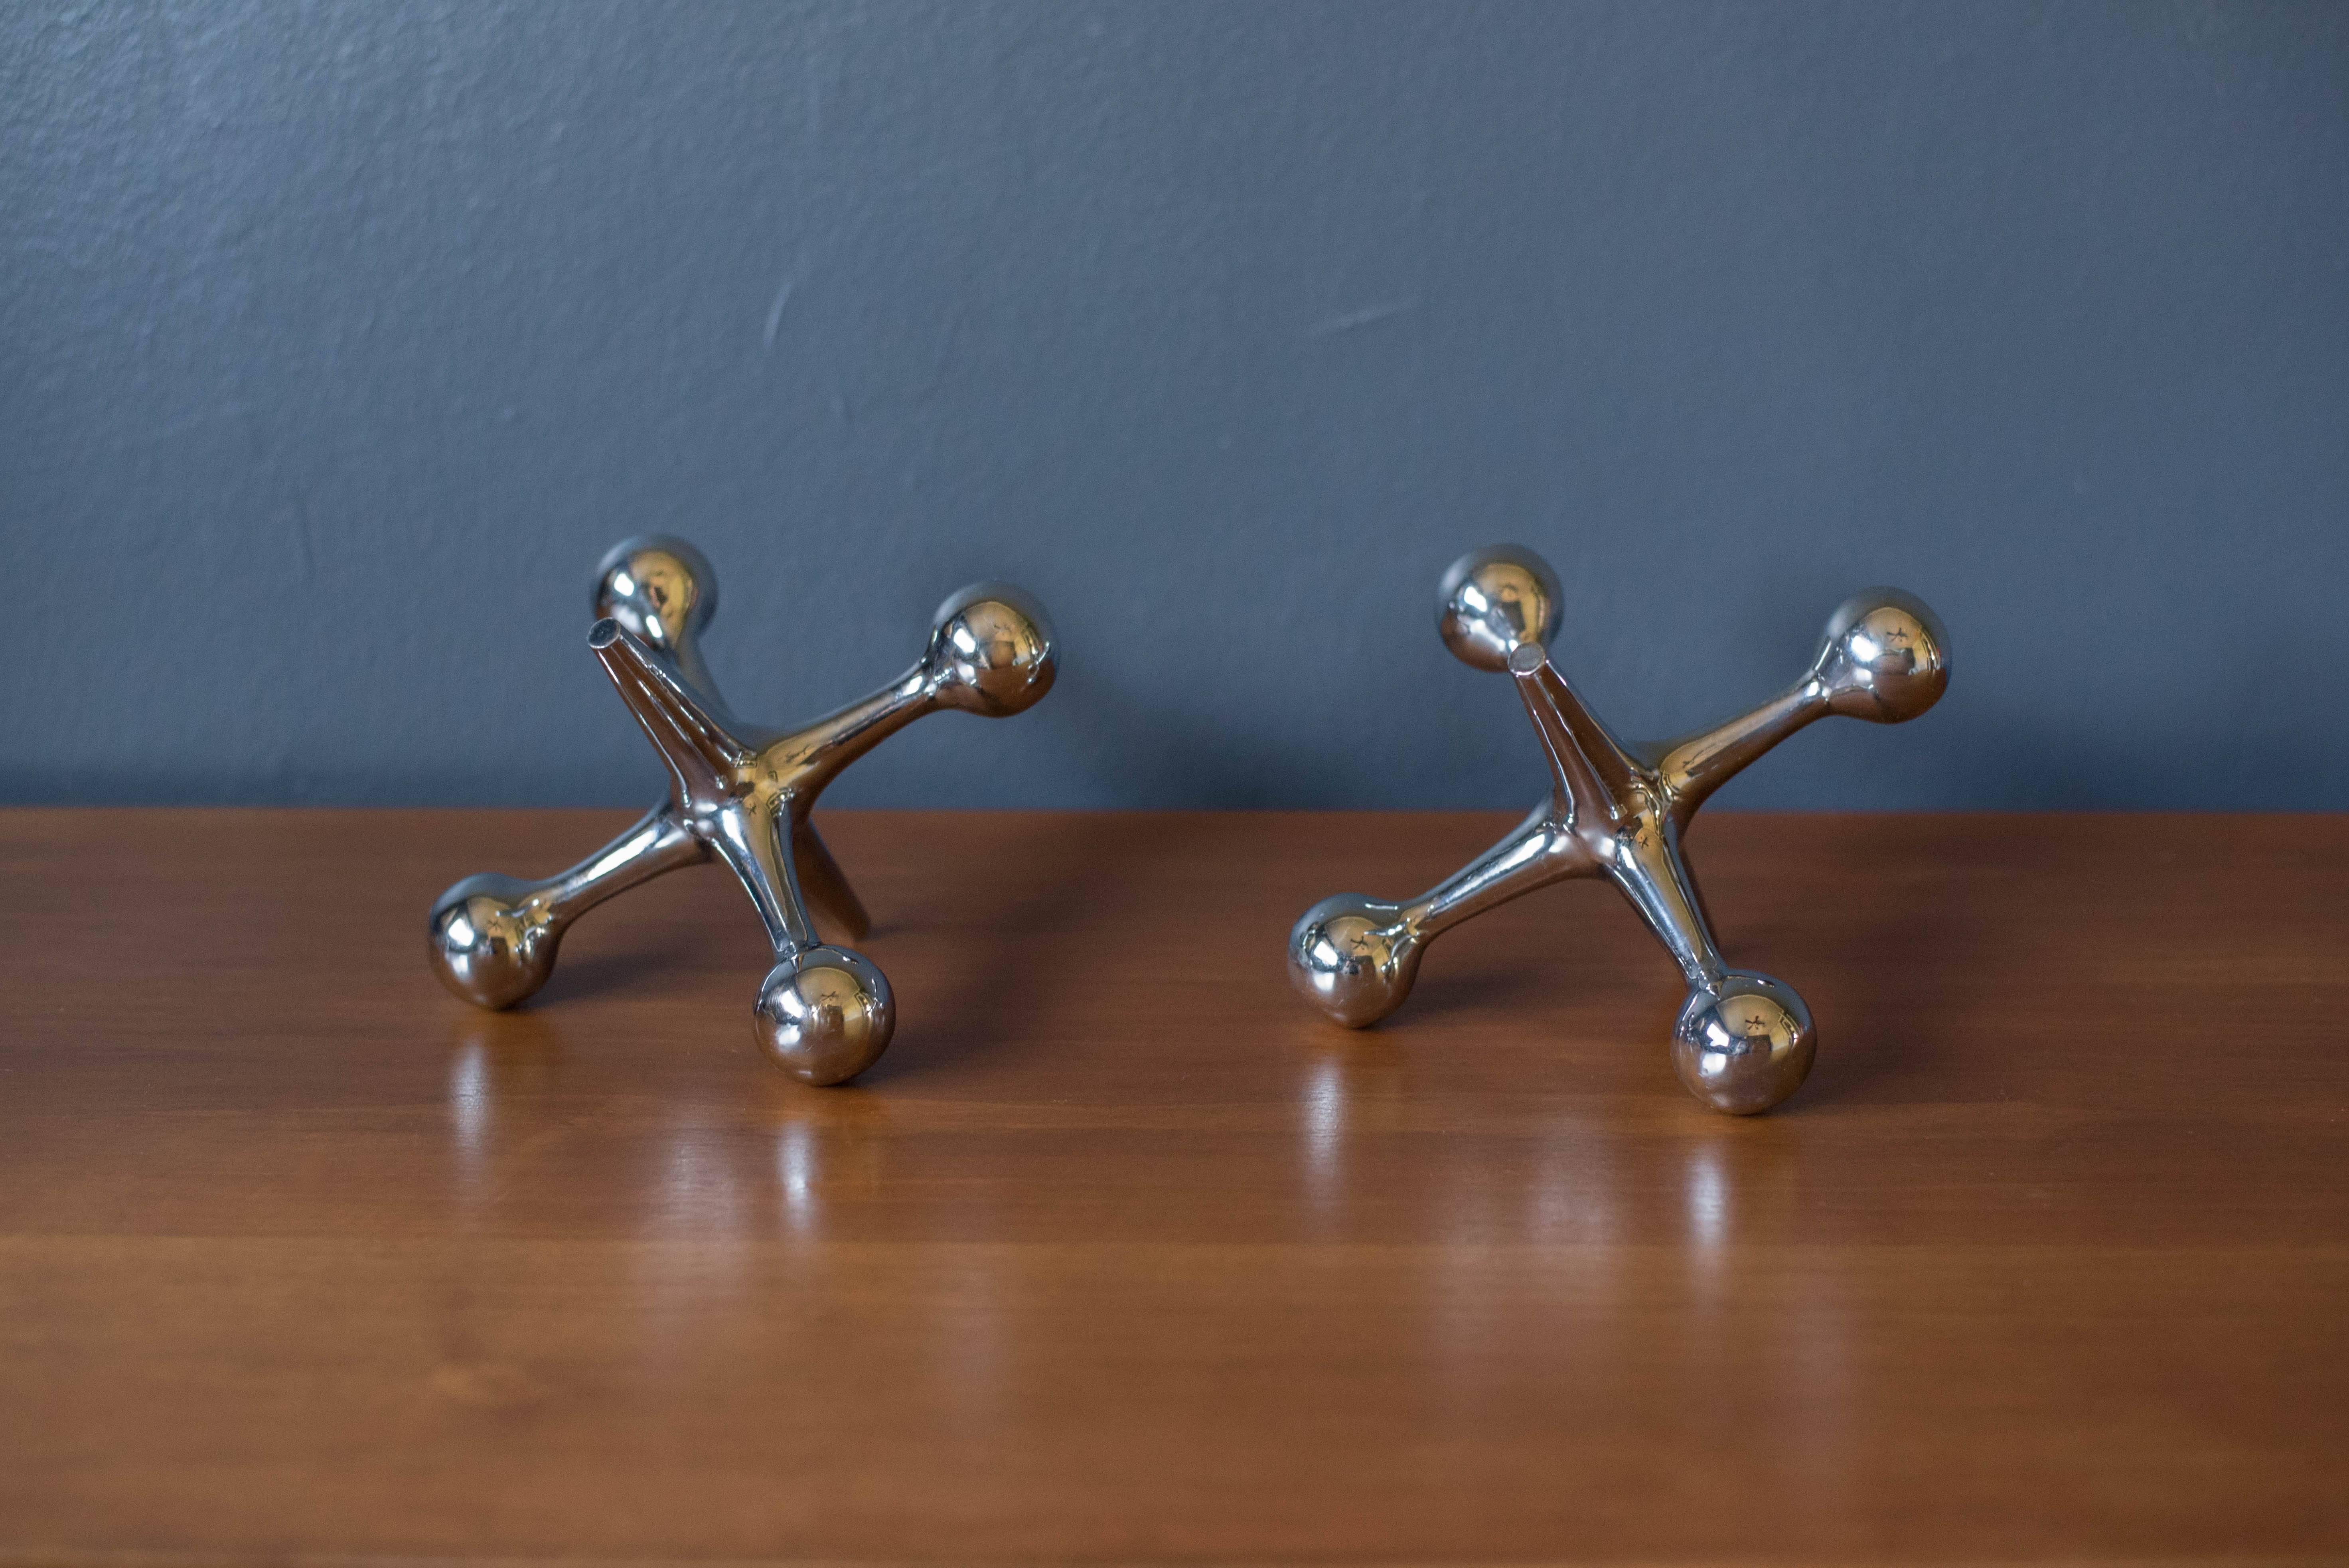 Mid-Century Modern jacks by Bill Curry for Design Line. This pair is made of chrome and can be displayed as bookends. Price is for the set. 

 